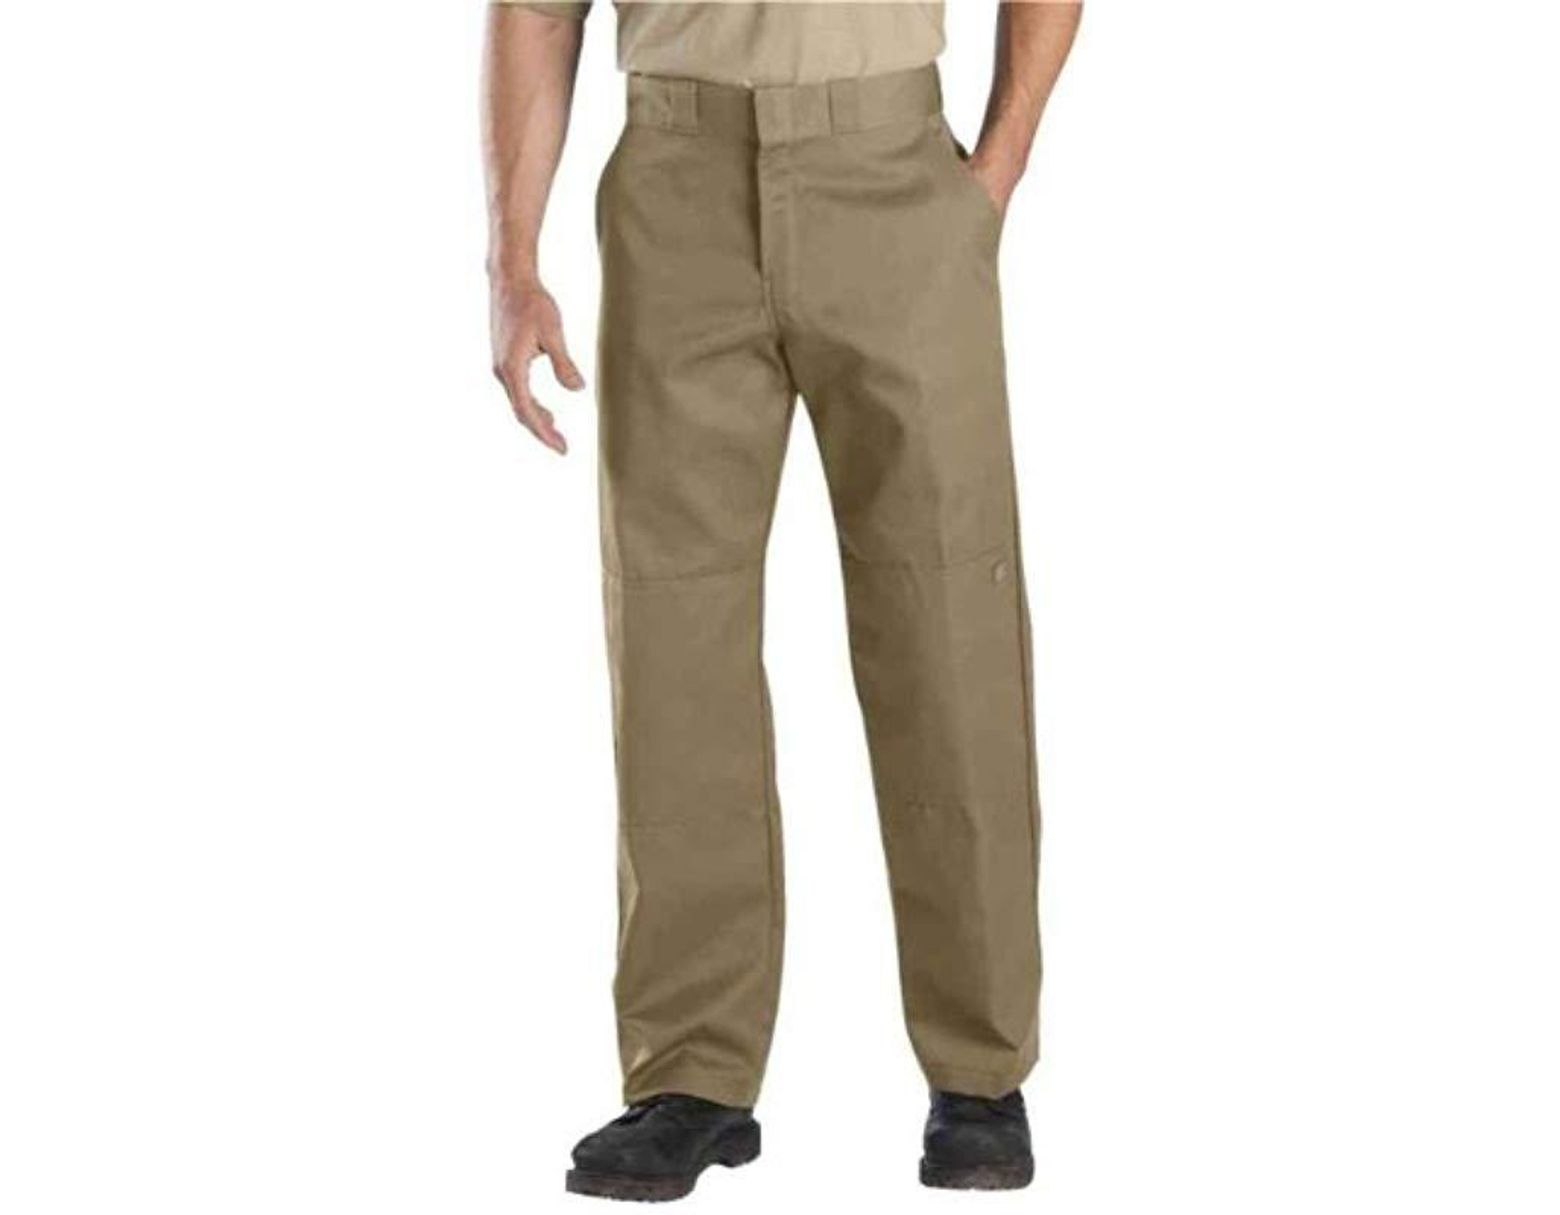 Dickies Relaxed Straight Fit Double Knee Twill Work Pants - FitnessRetro